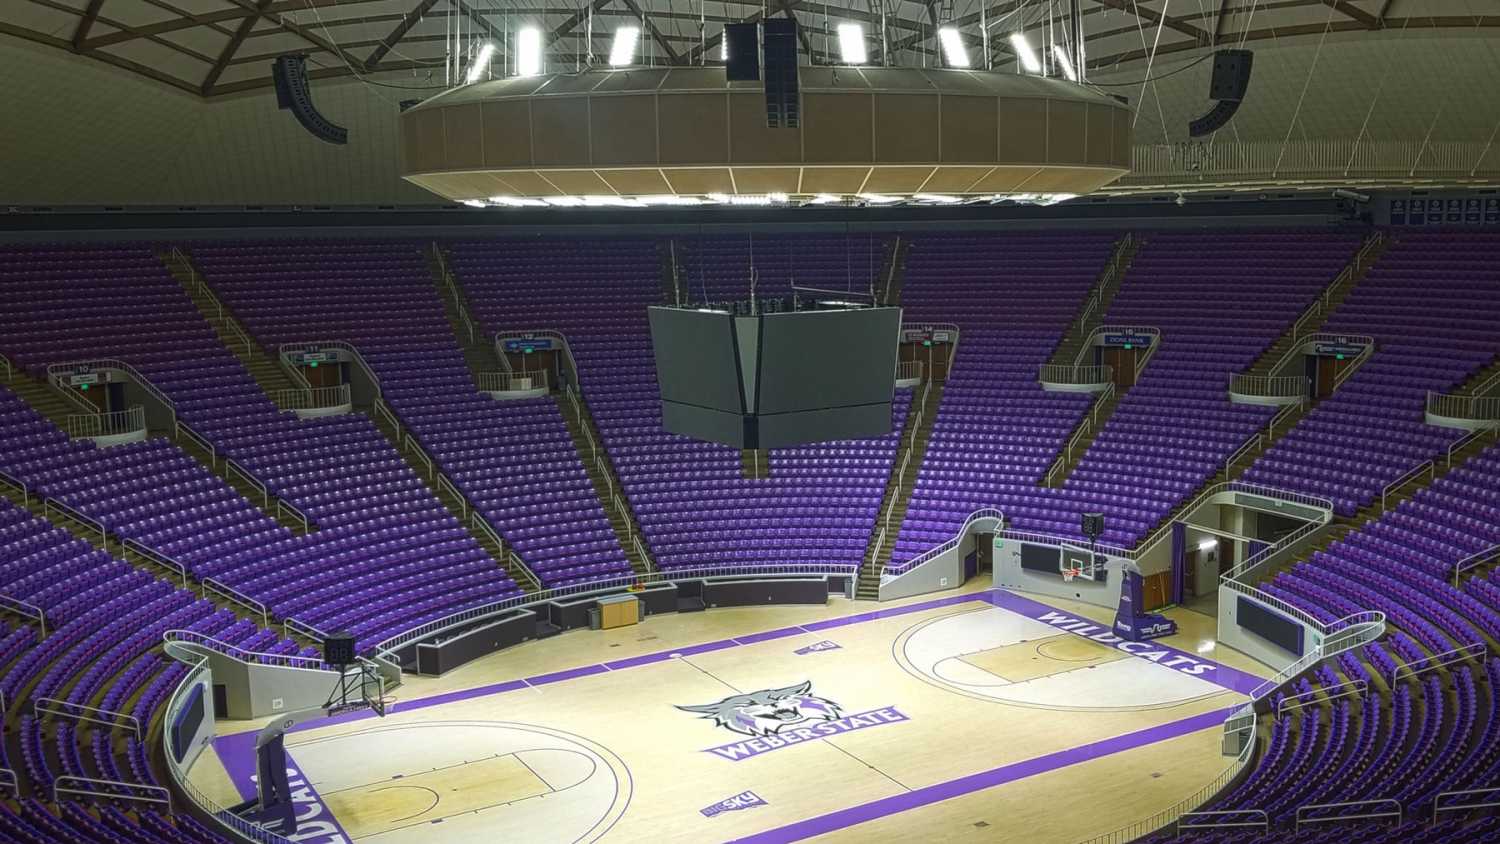 Weber State University’s Dee Events Centre is now home to a new L-Acoustics Kara(i)/SB18i system